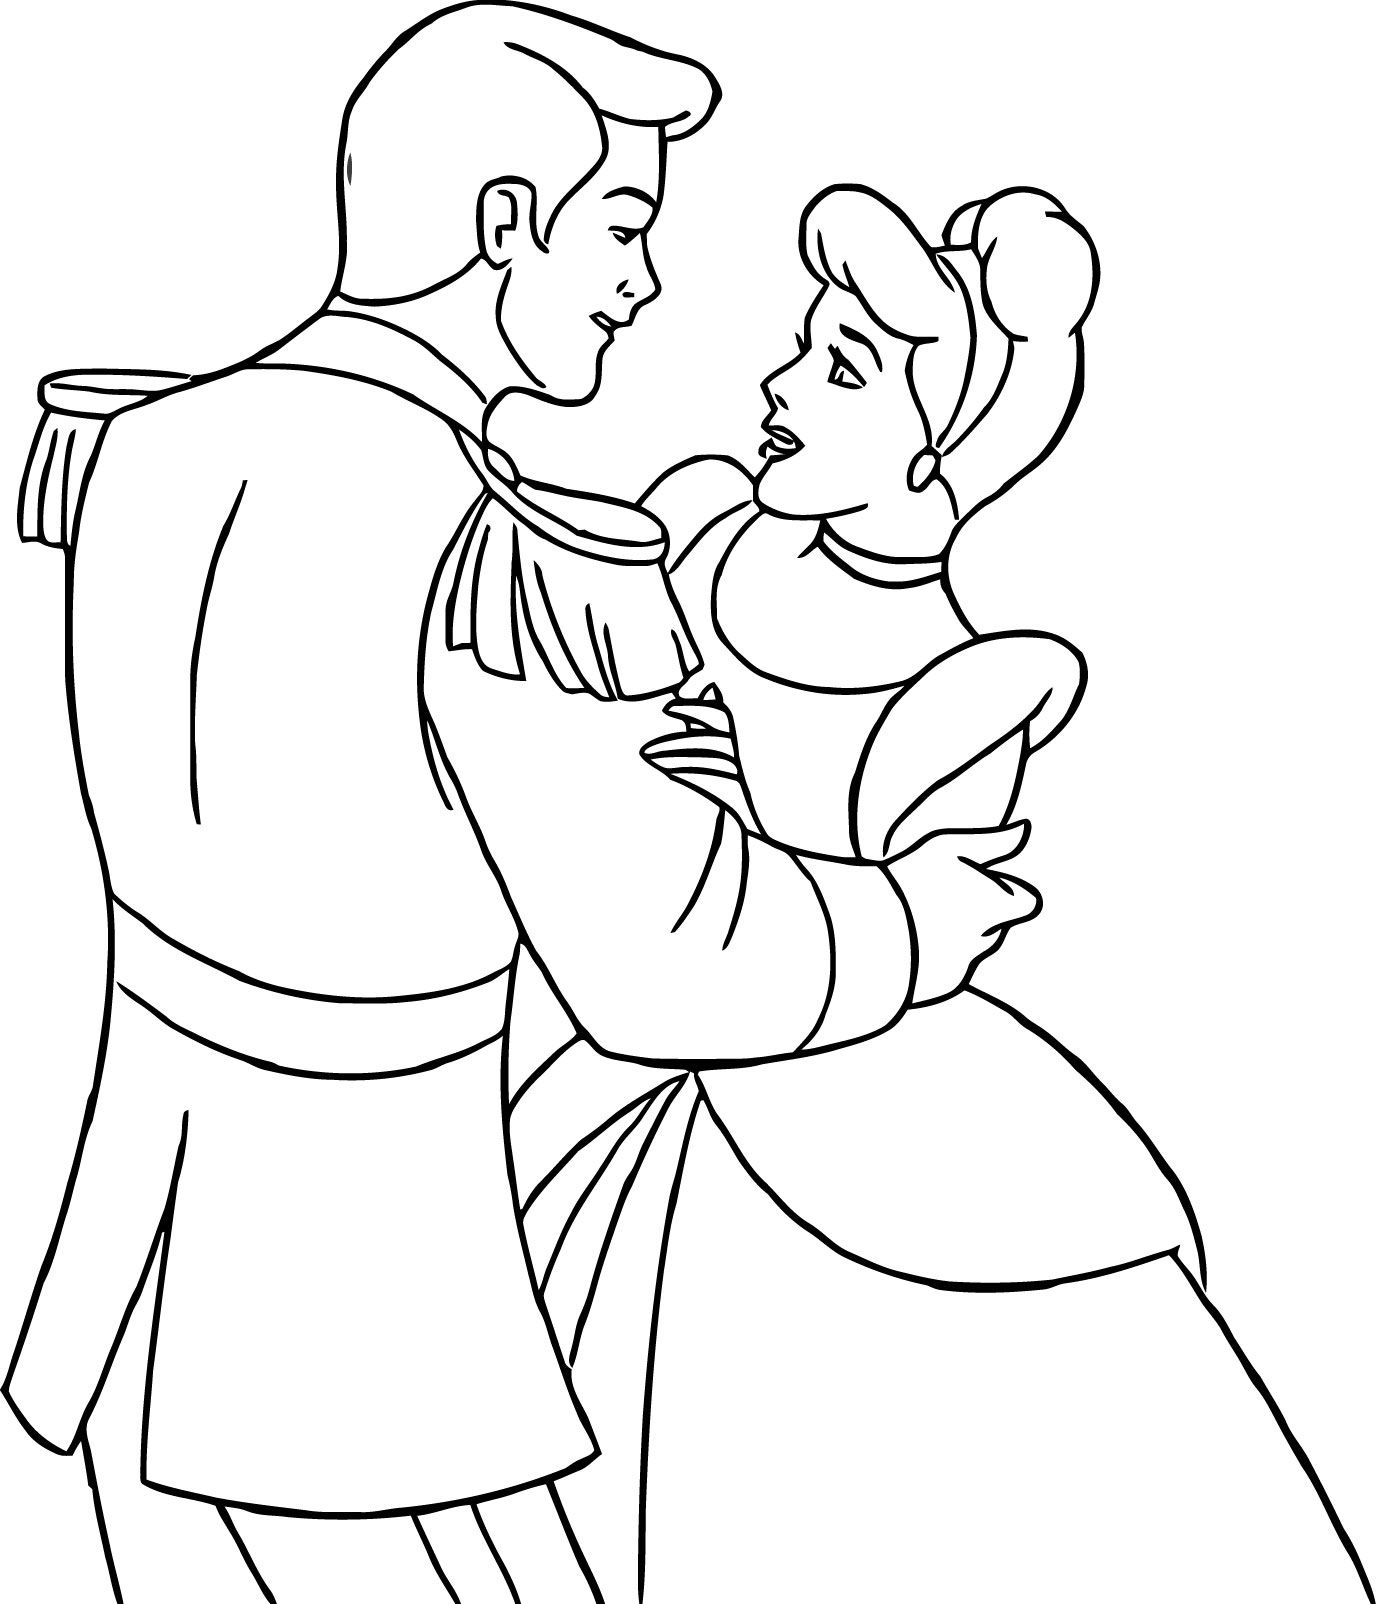 Cinderella Prince Charming Coloring Pages at GetColorings.com | Free